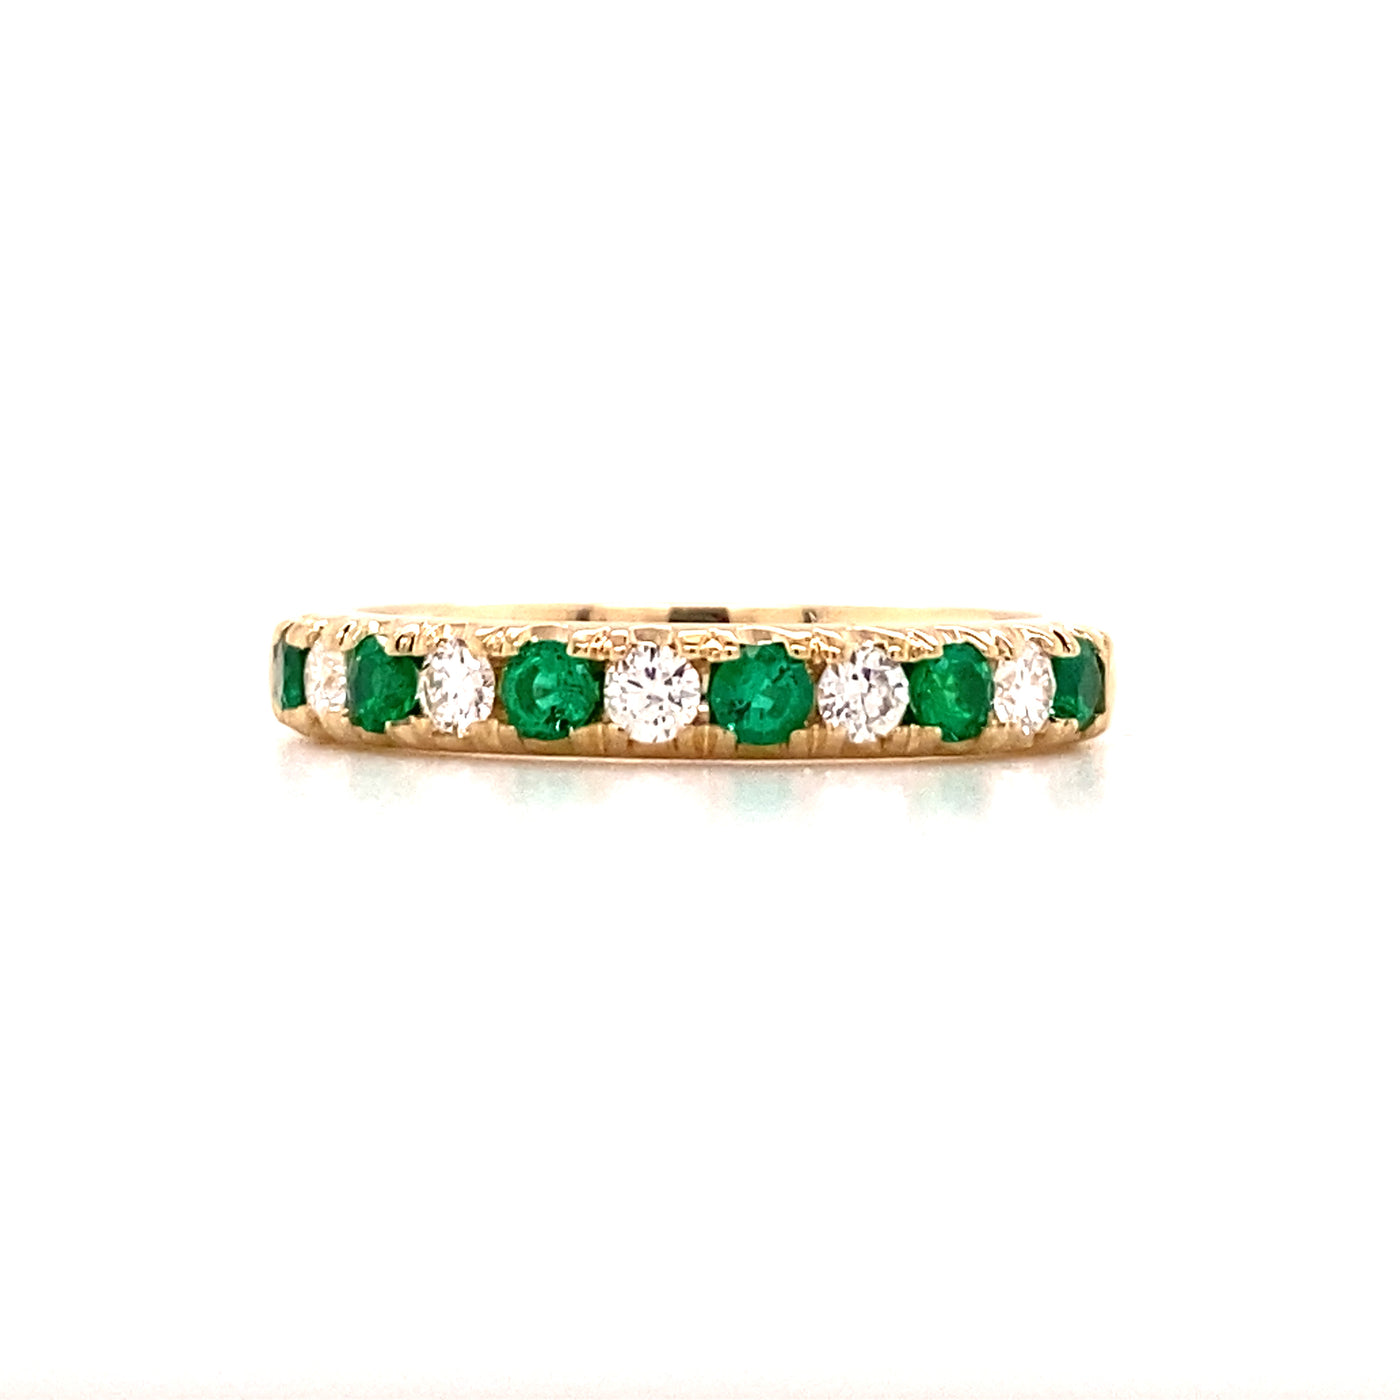 Beeghly & Co. 14 Karat 1/2 Carat Emerald and Diamond Band BCR-7-5Y